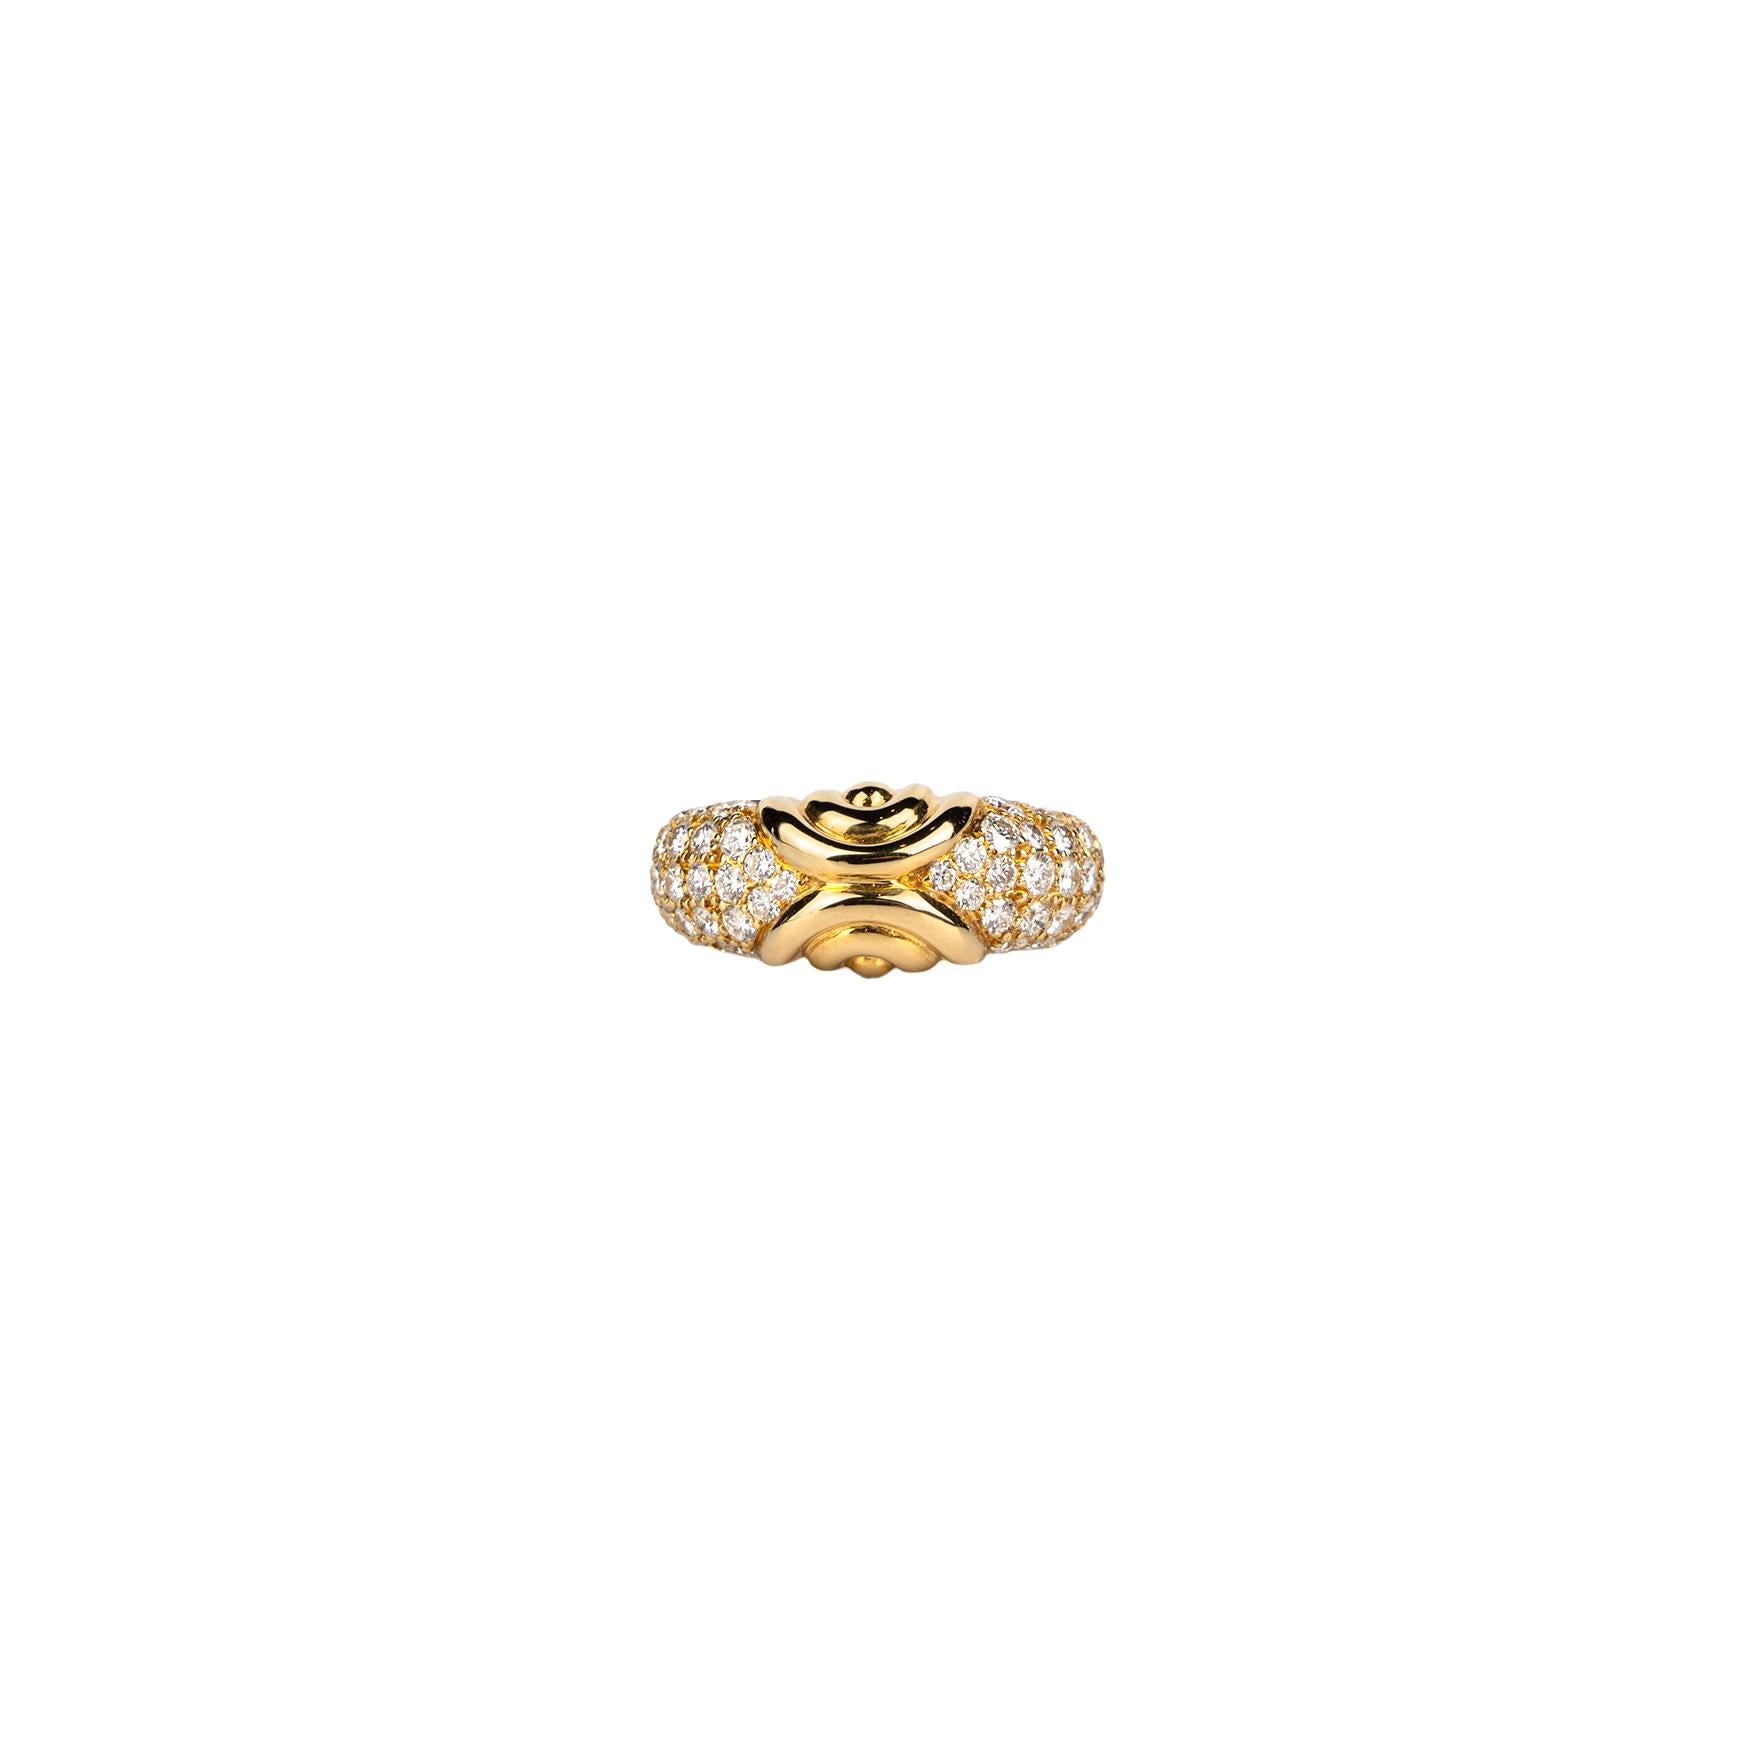 A classic vintage Bulgari ring in the 'Doppio Cuore' style, mounted on 18k yellow gold with pavé diamonds. Made in Italy, circa 1980.